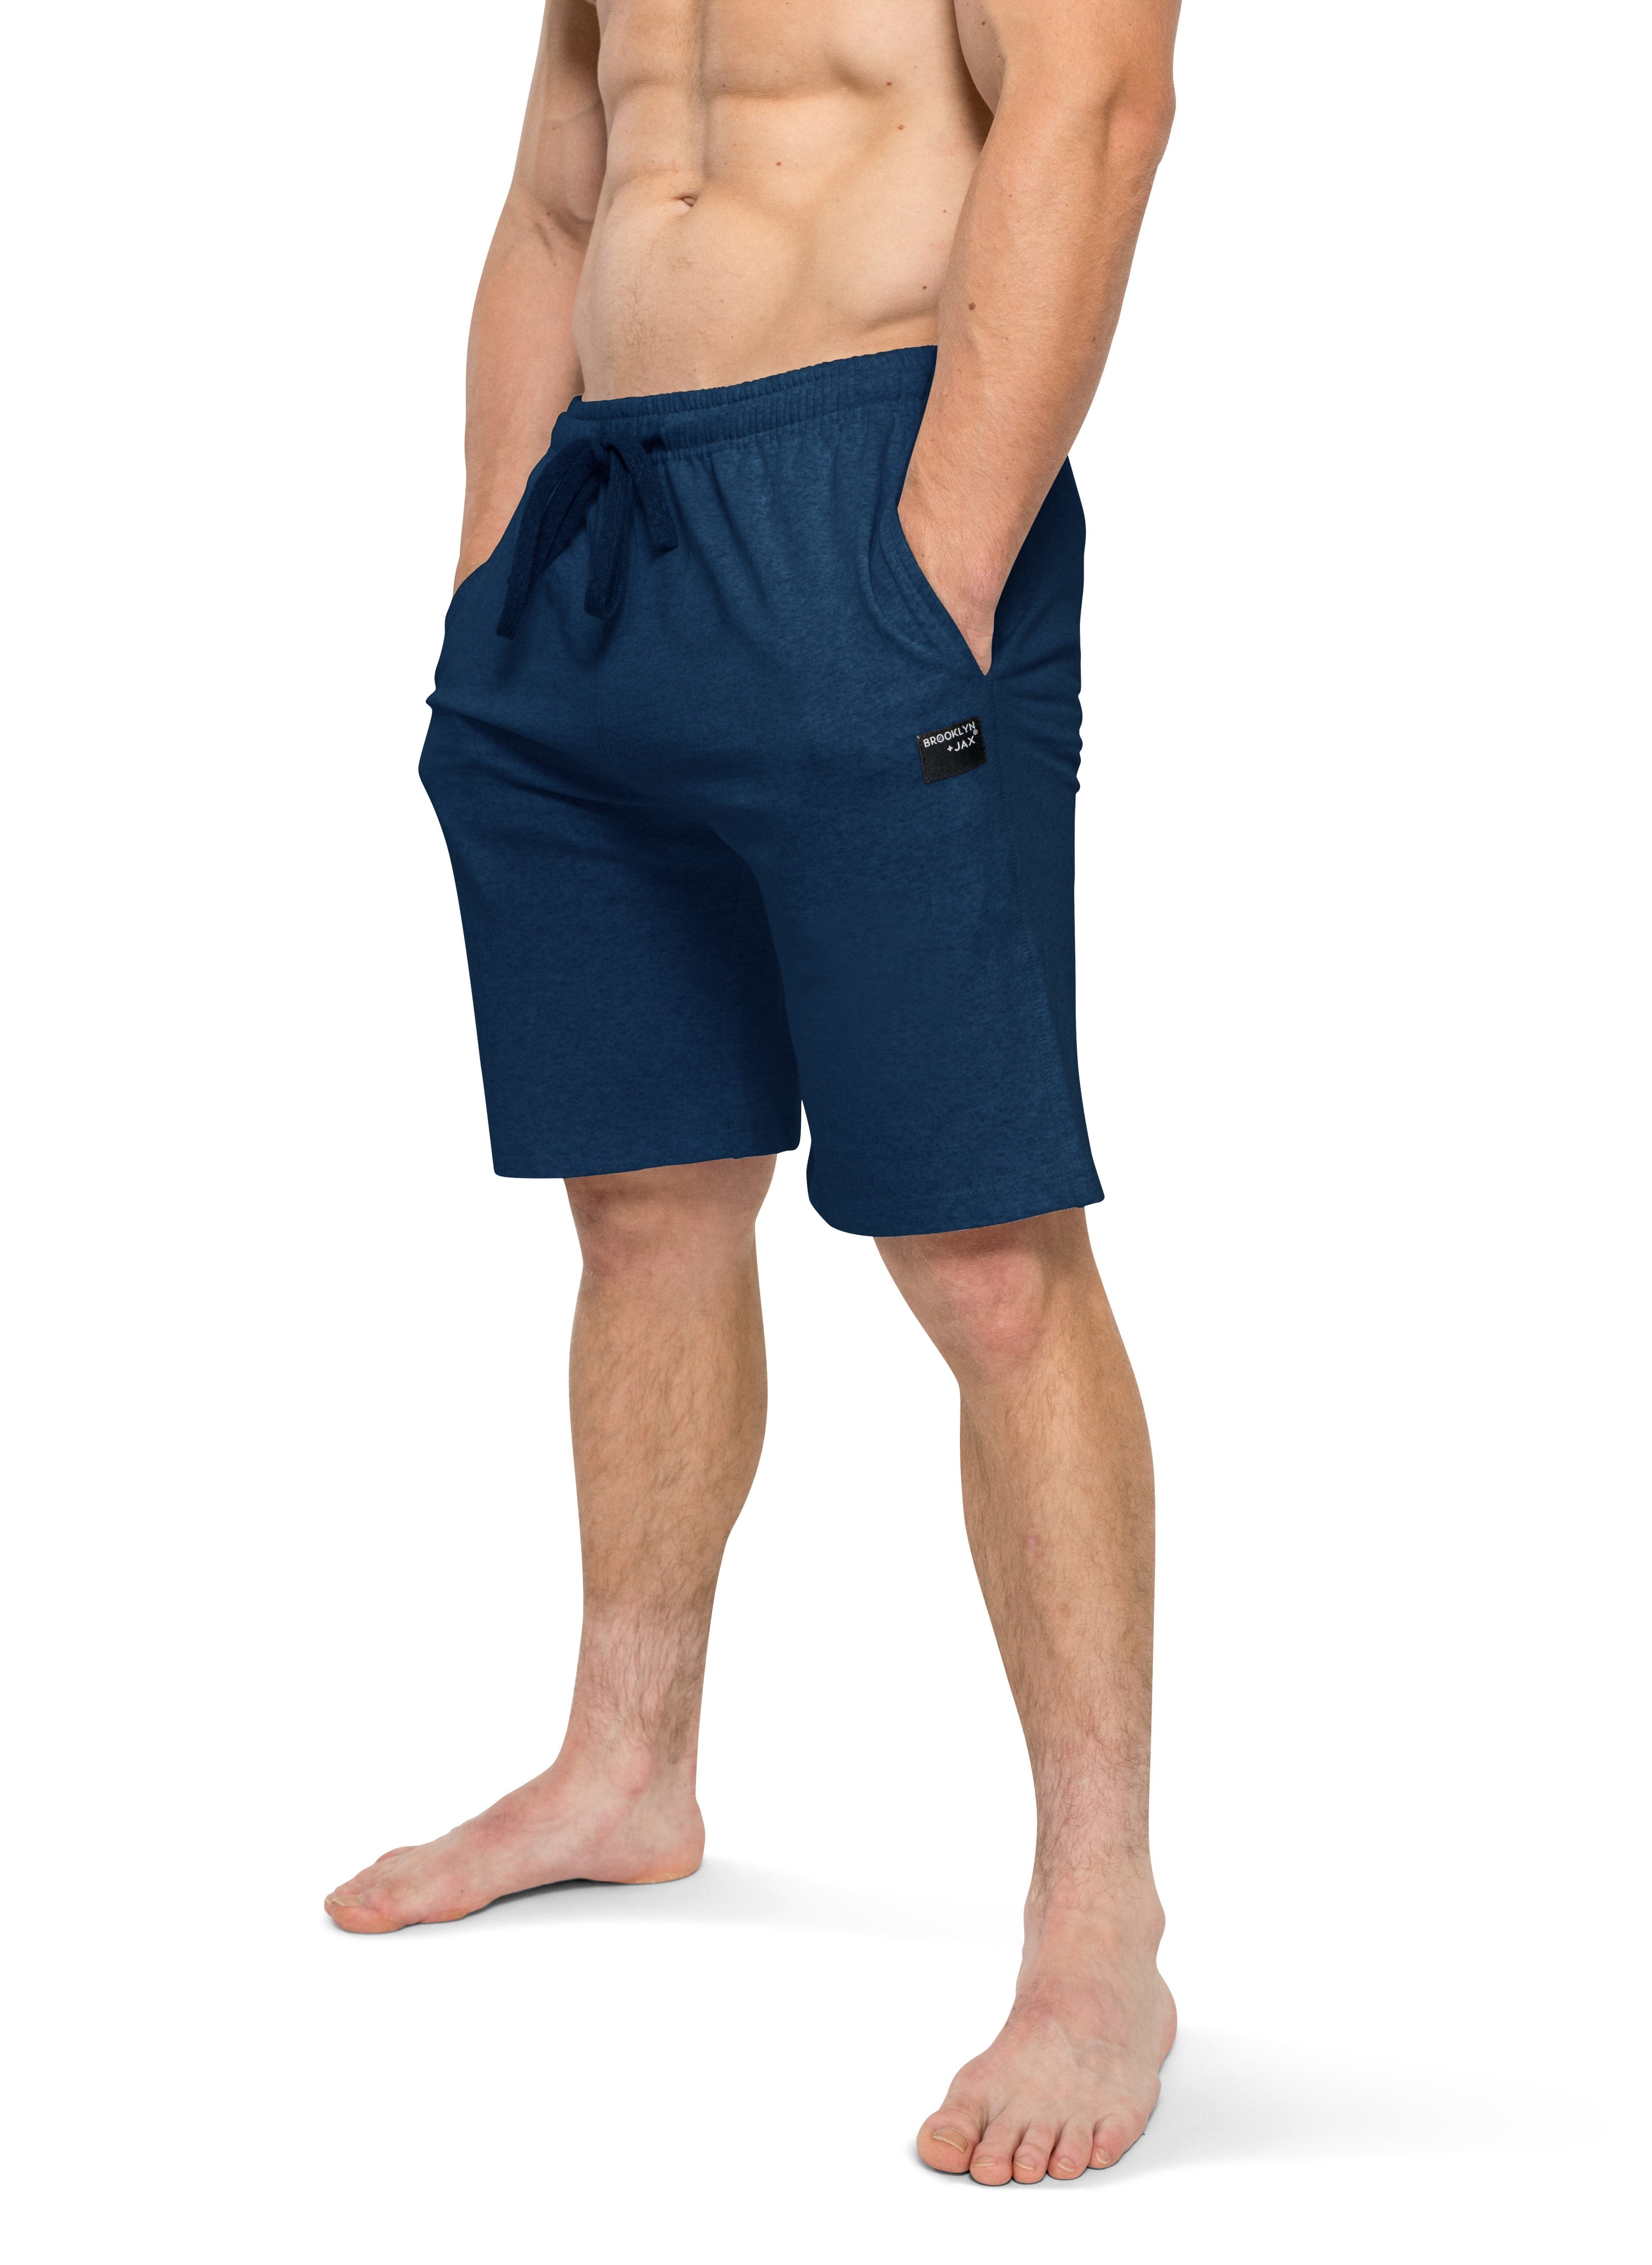 Men's Lounge Shorts | Pack of 2 or 3